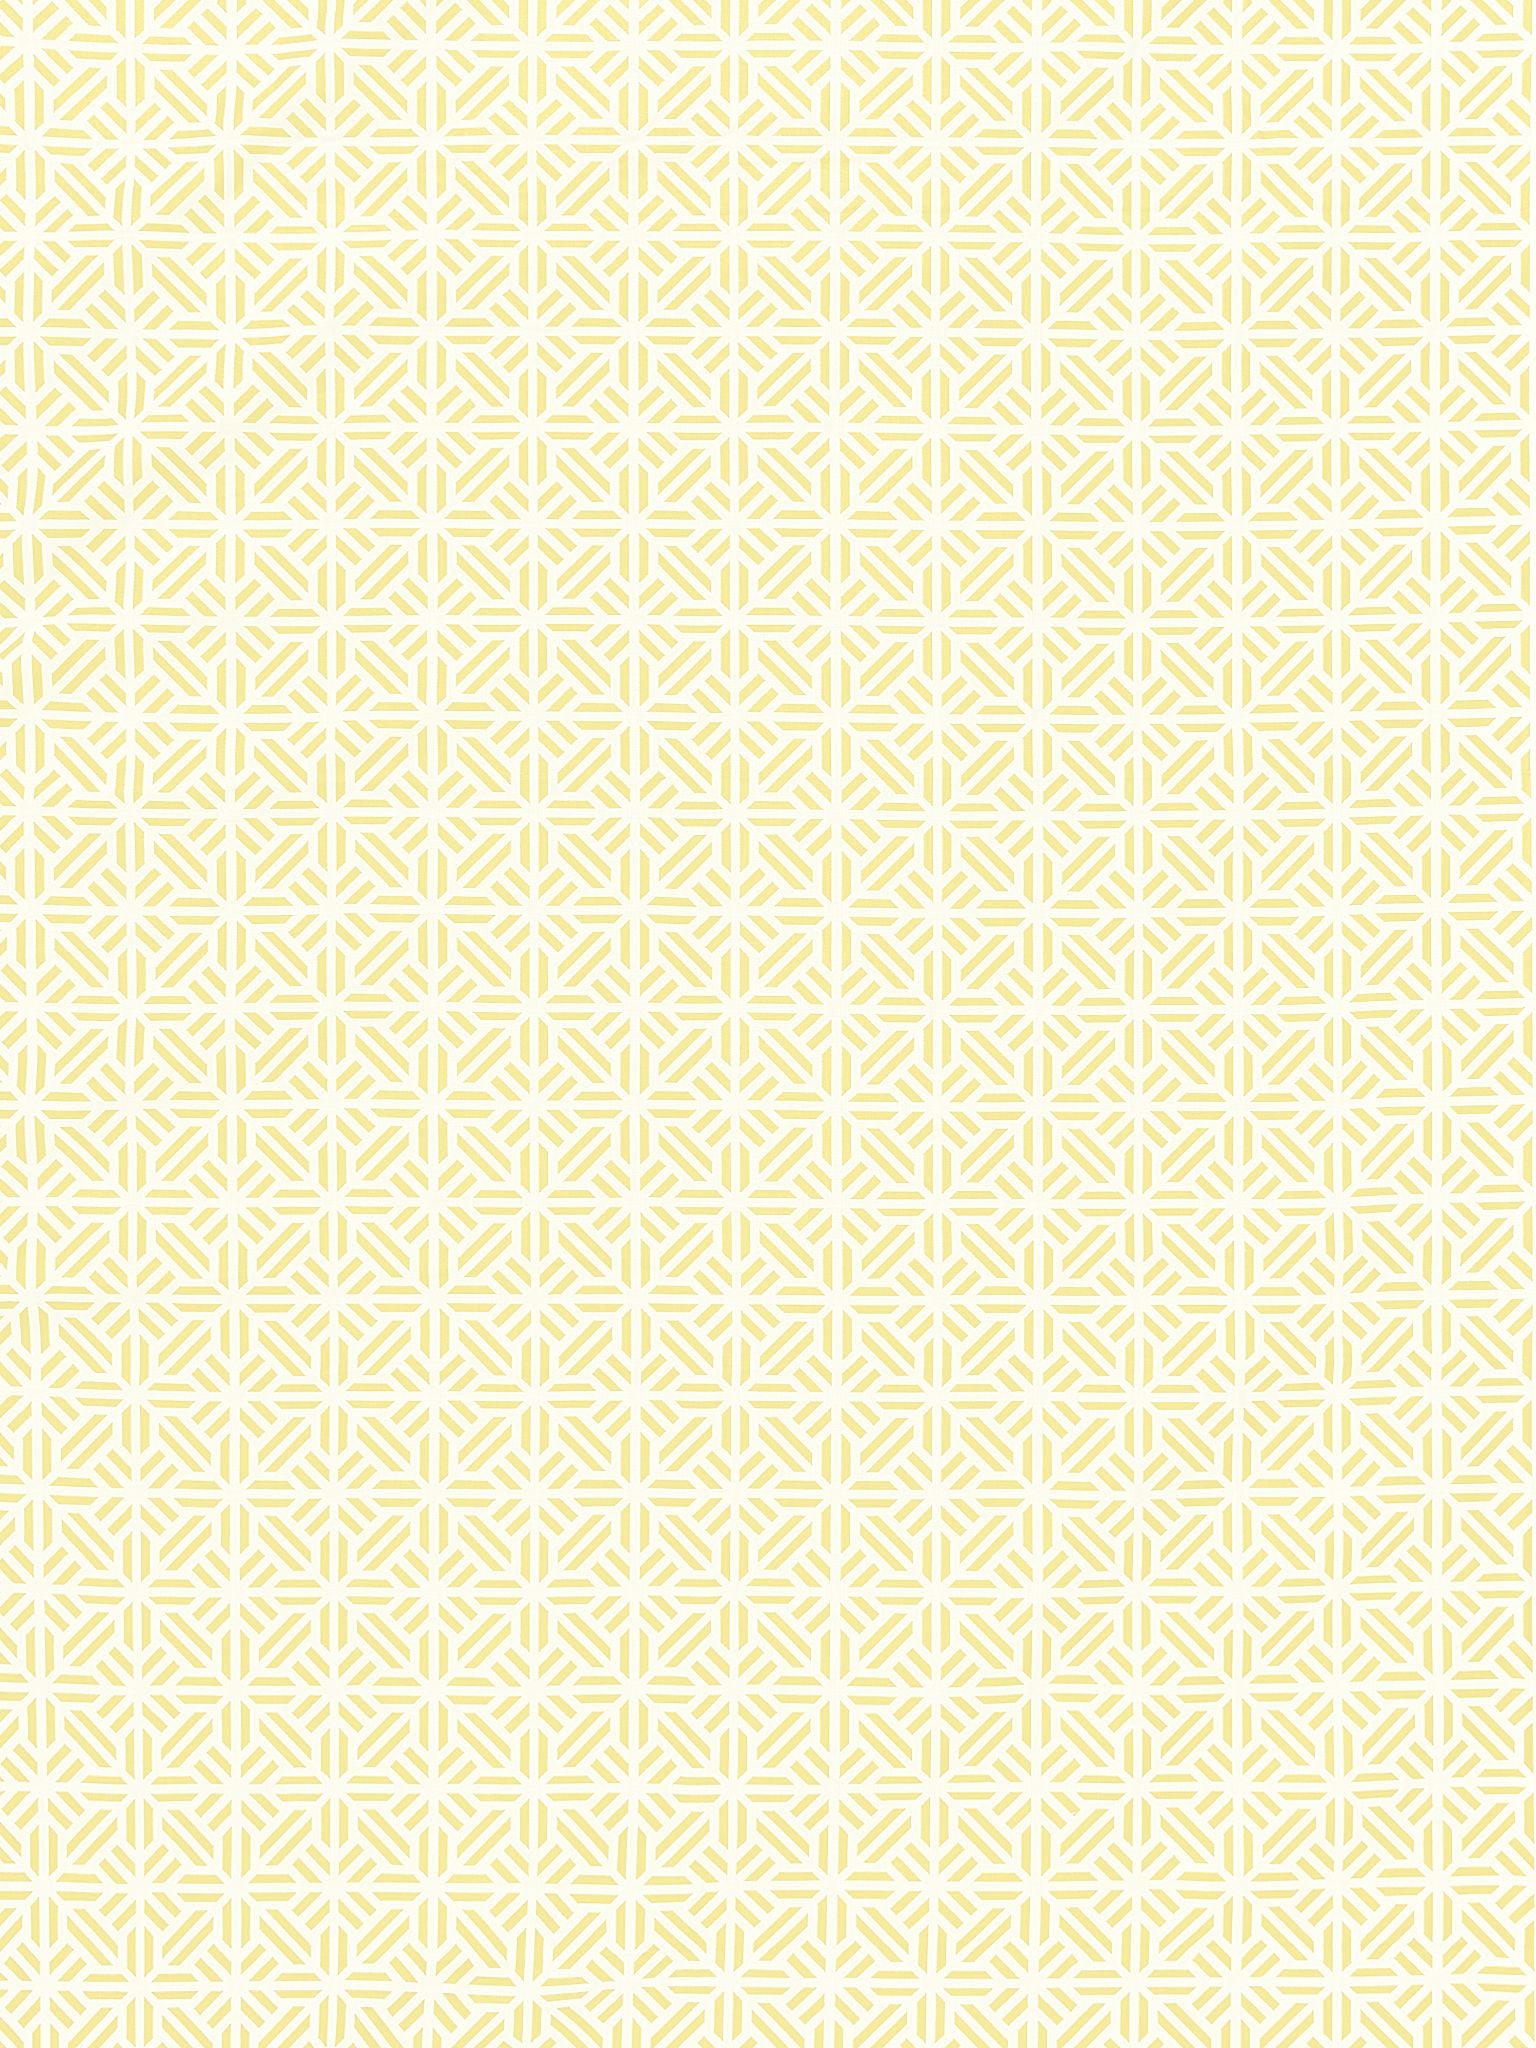 Tile Weave fabric in canary color - pattern number SC 000227213 - by Scalamandre in the Scalamandre Fabrics Book 1 collection